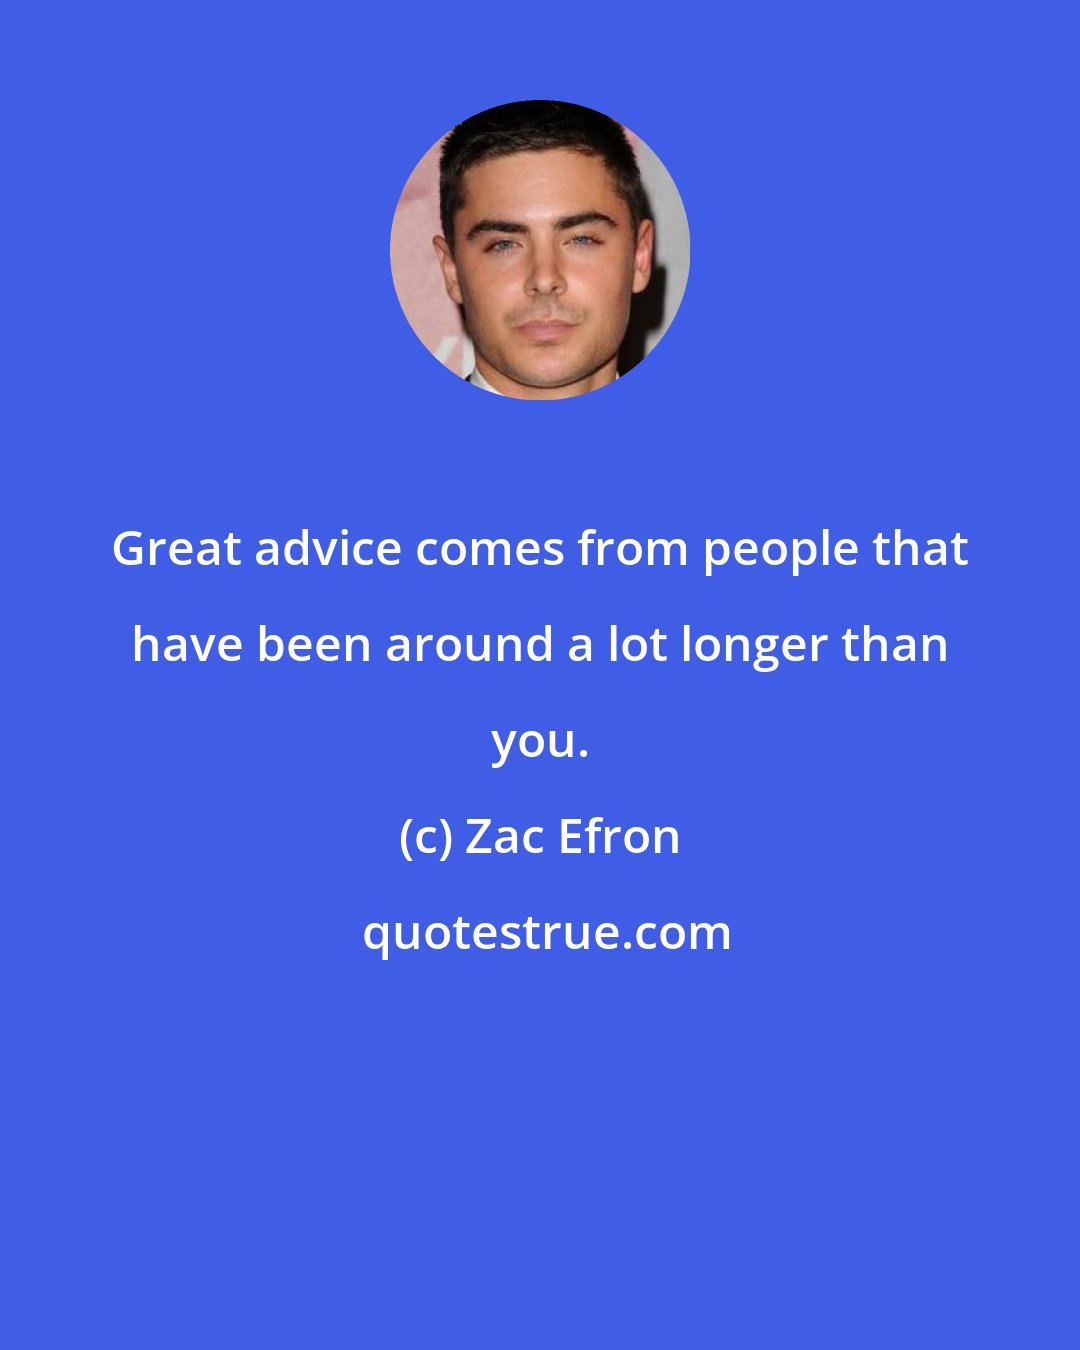 Zac Efron: Great advice comes from people that have been around a lot longer than you.